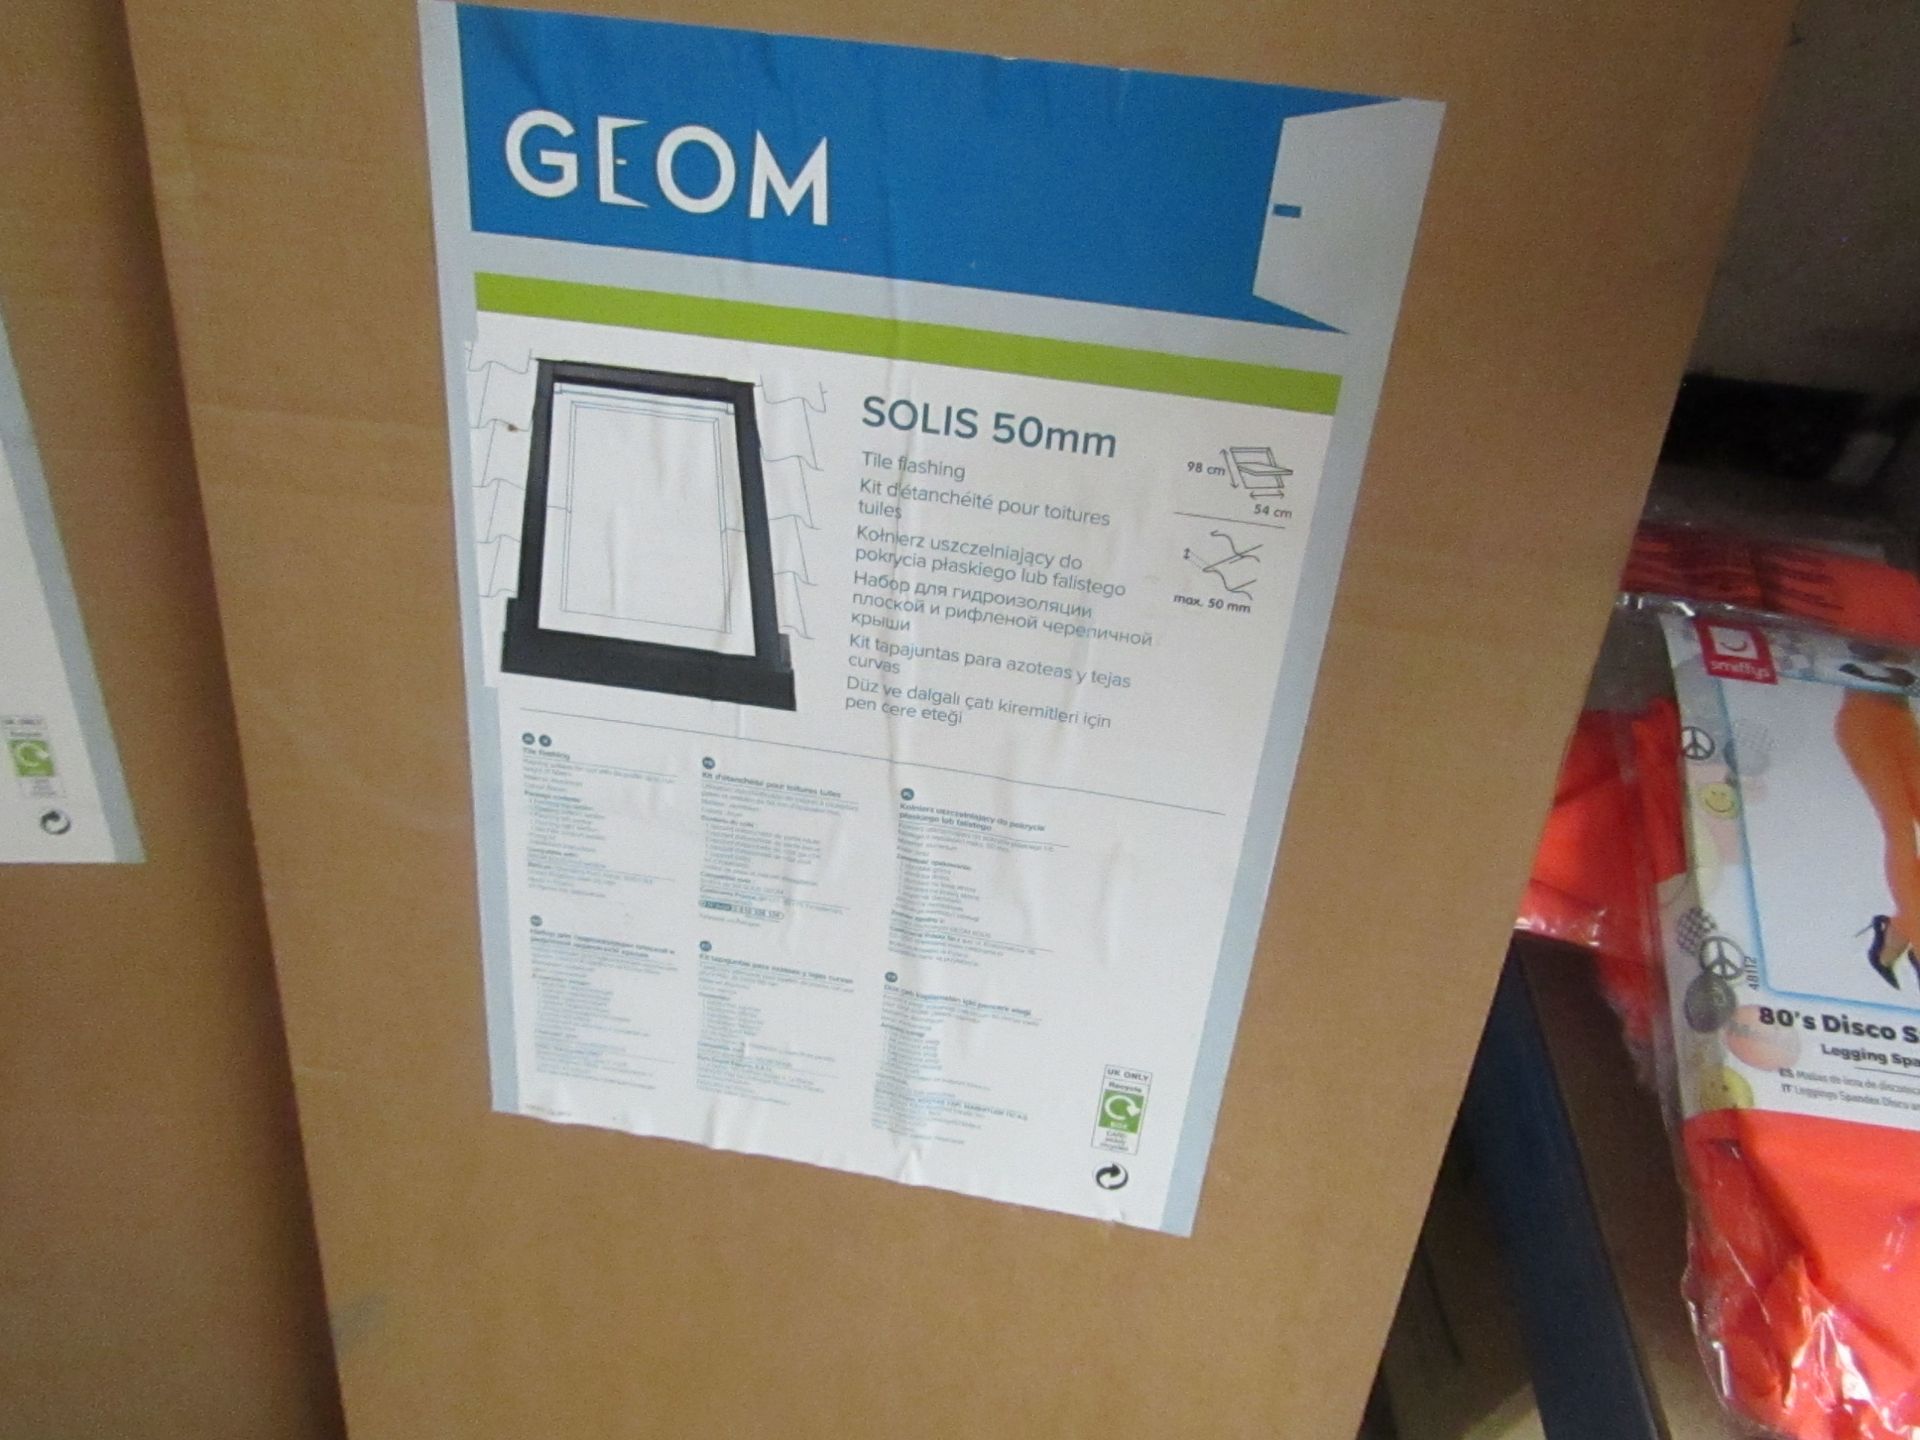 Geom - Solis 50mm Slate Flashing (Suitable For Finishing Tiles) - Unchecked & Boxed. - Image 2 of 2